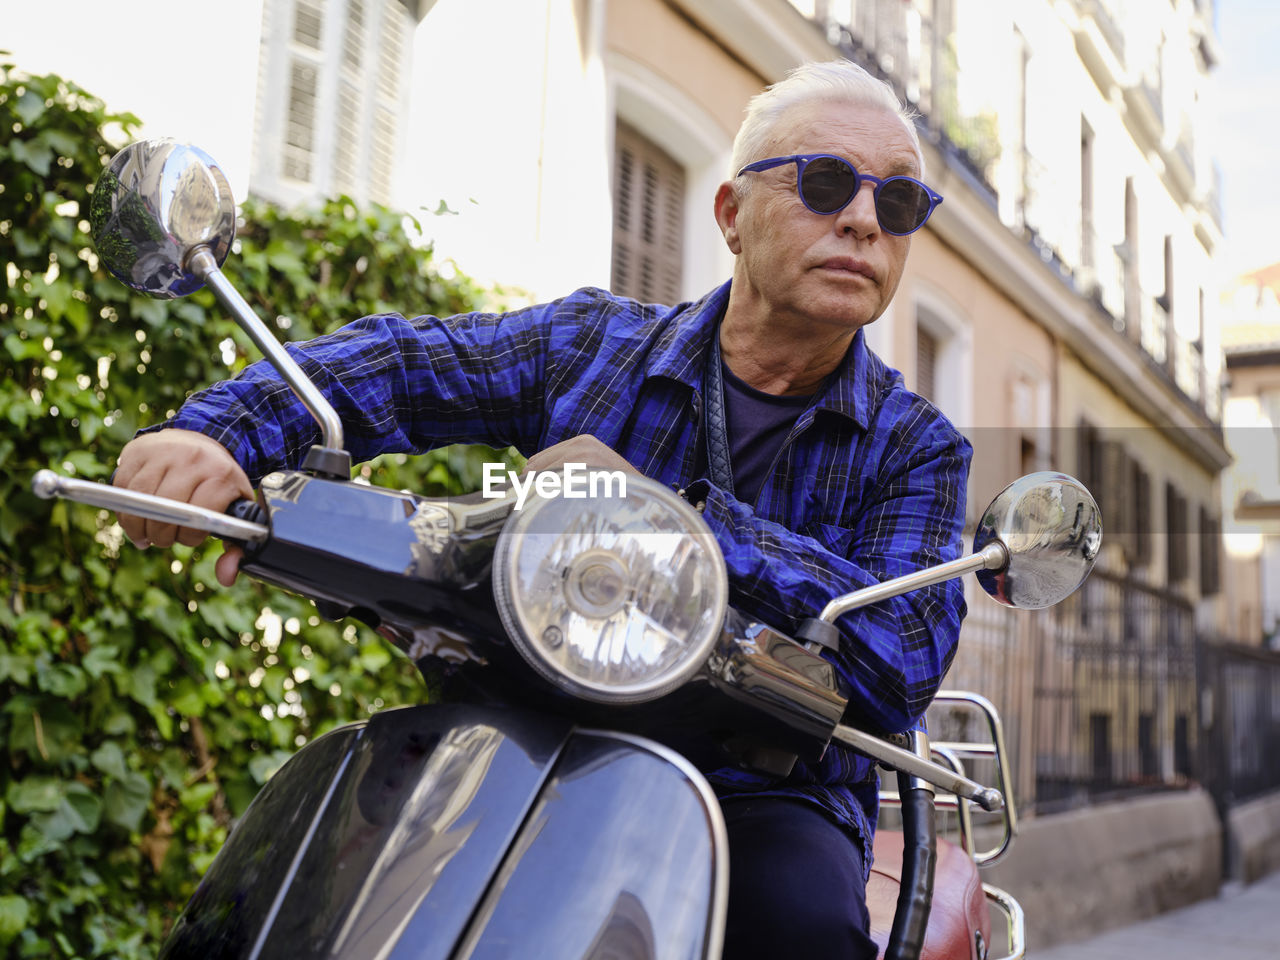 Low angle of smiling woman in vintage outfit sitting on retro motorbike and cheerfully looking away